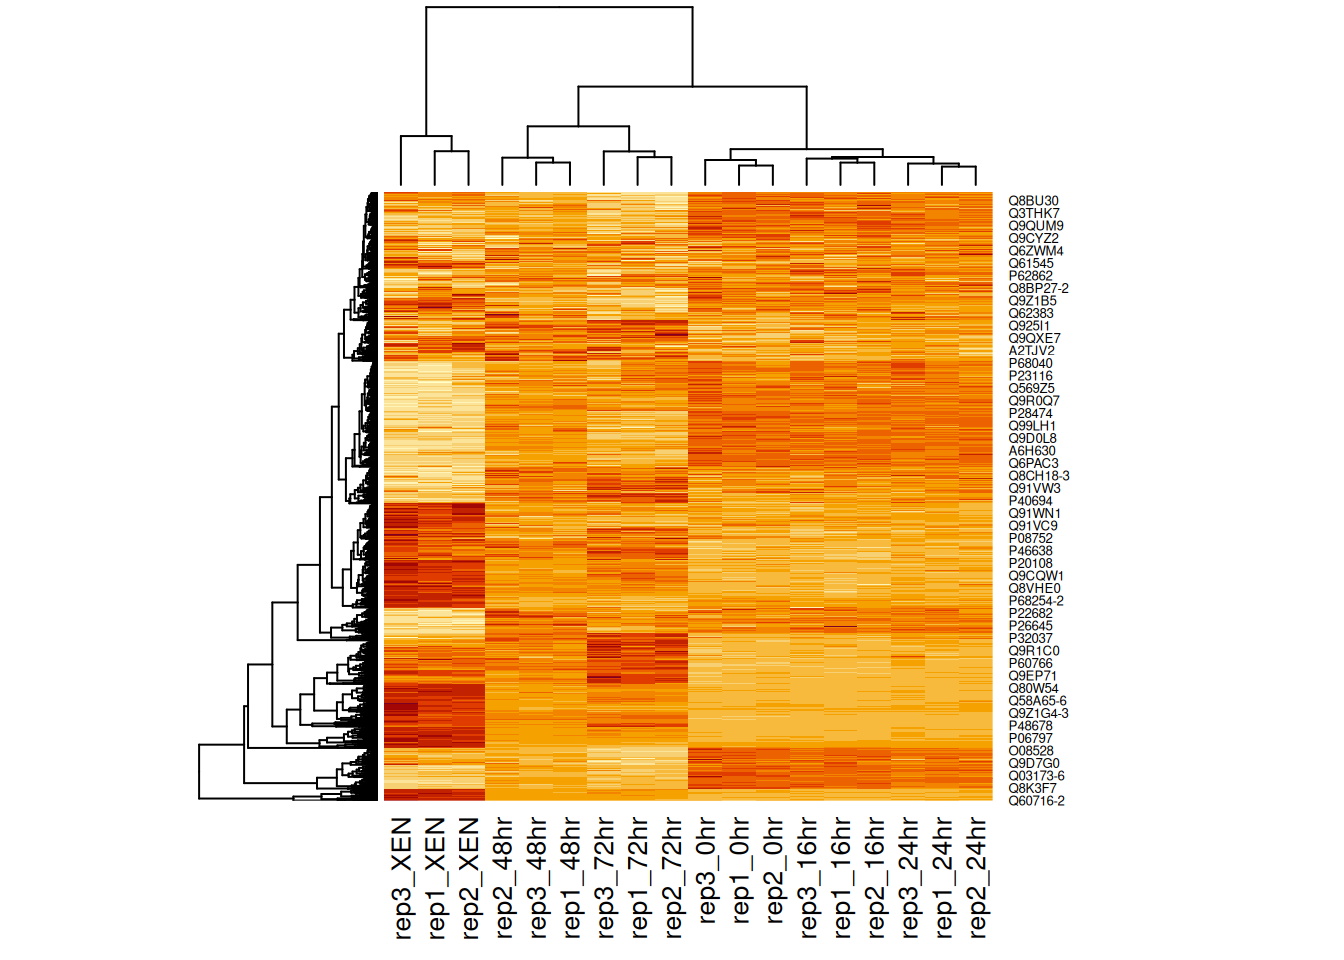 Heatmap of the (normalised) Mulvey et al. 2015 proteomic data.